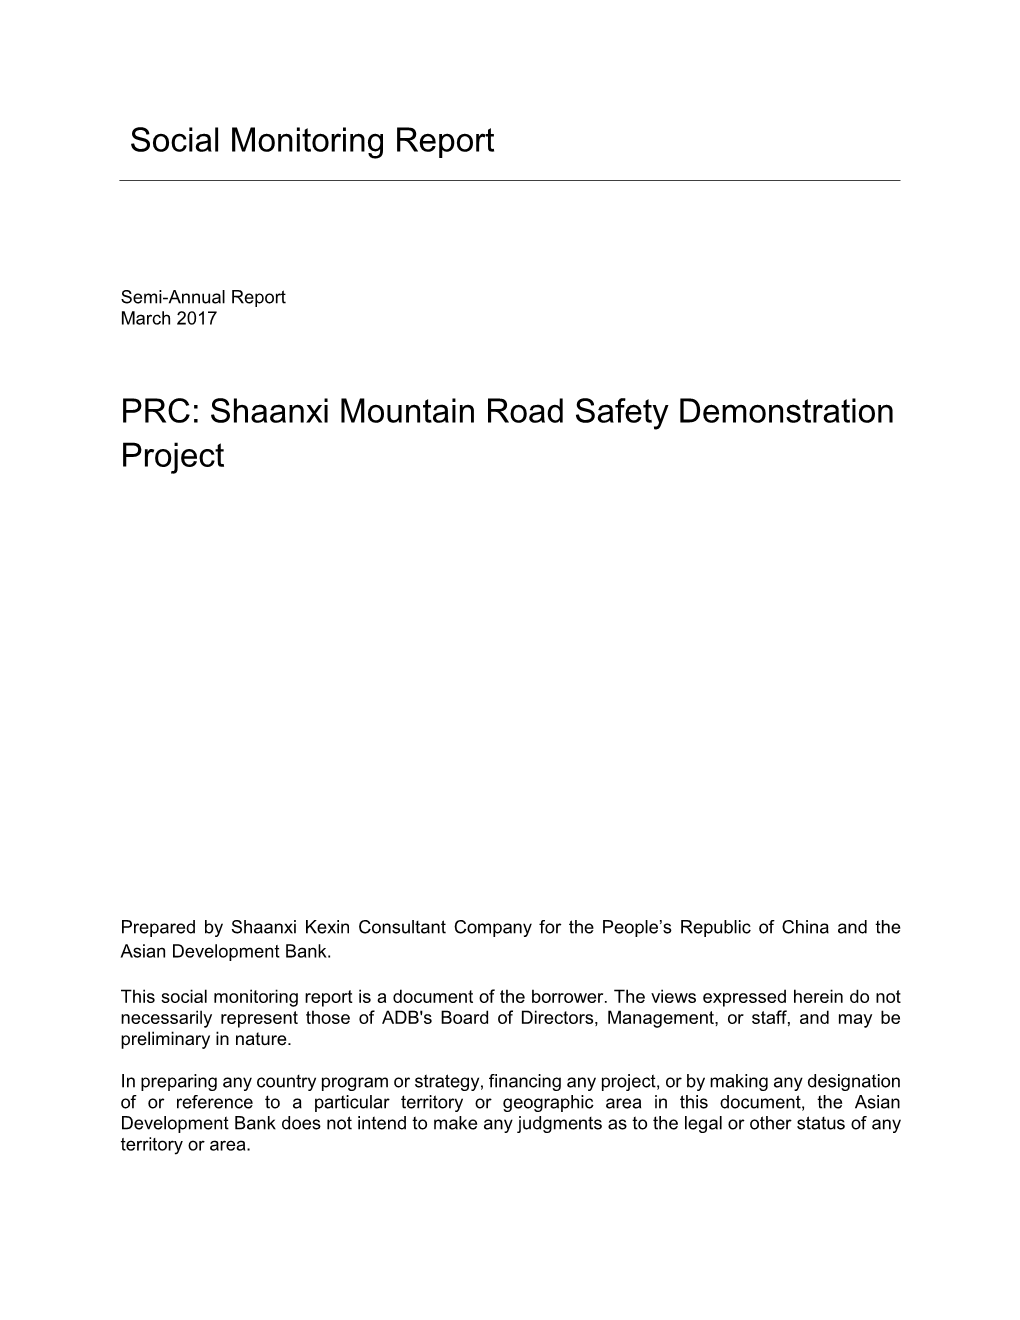 Social Monitoring Report PRC: Shaanxi Mountain Road Safety Demonstration Project